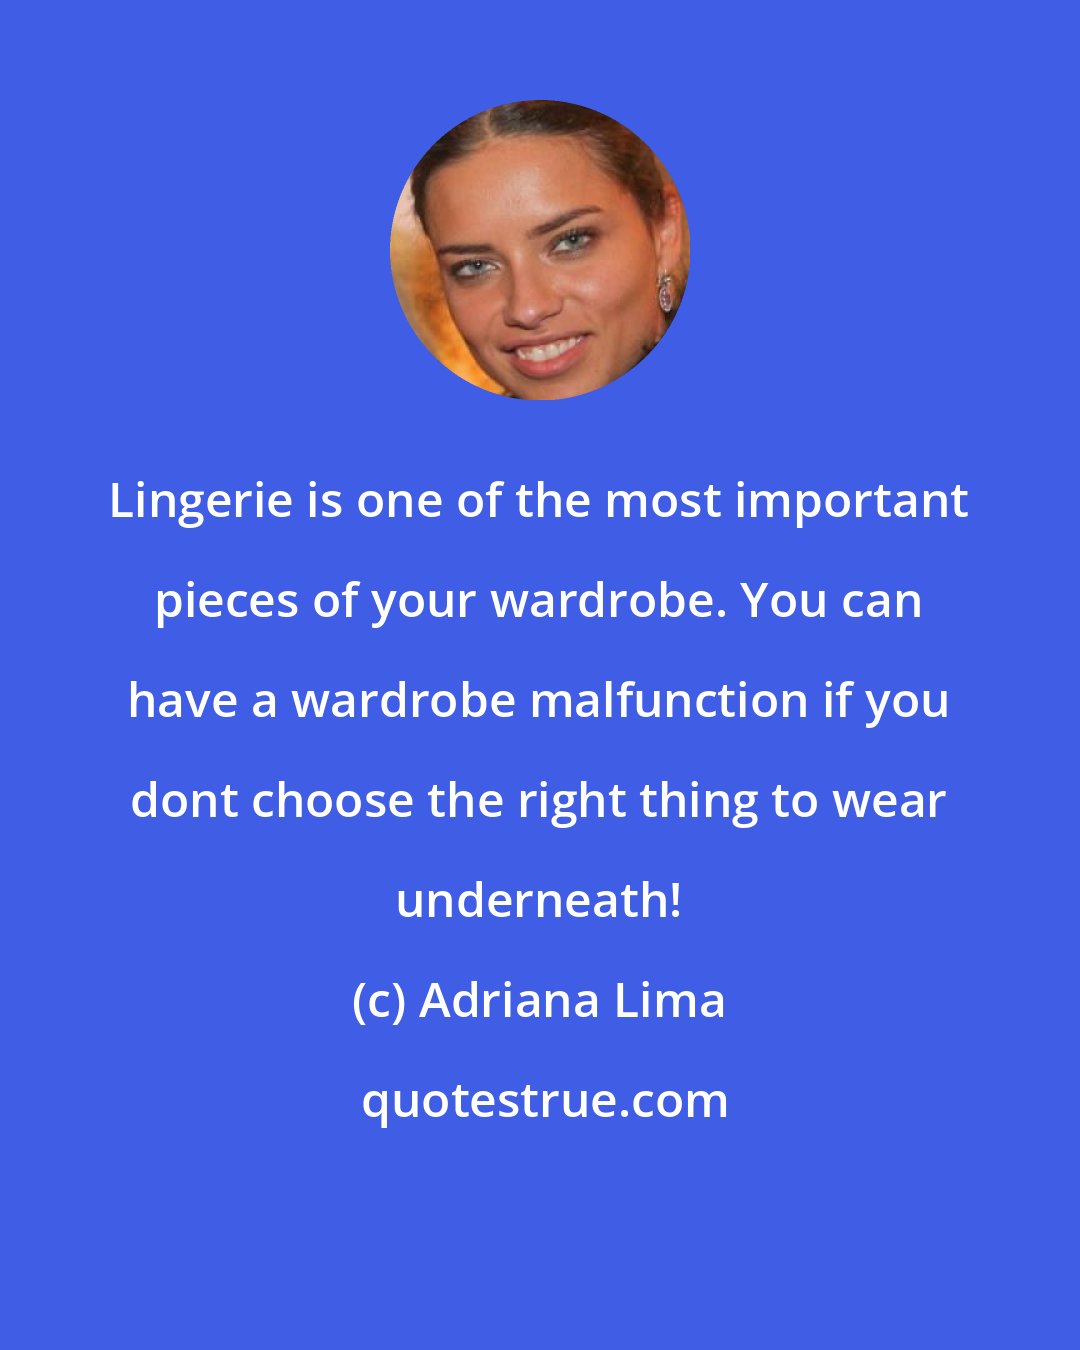 Adriana Lima: Lingerie is one of the most important pieces of your wardrobe. You can have a wardrobe malfunction if you dont choose the right thing to wear underneath!